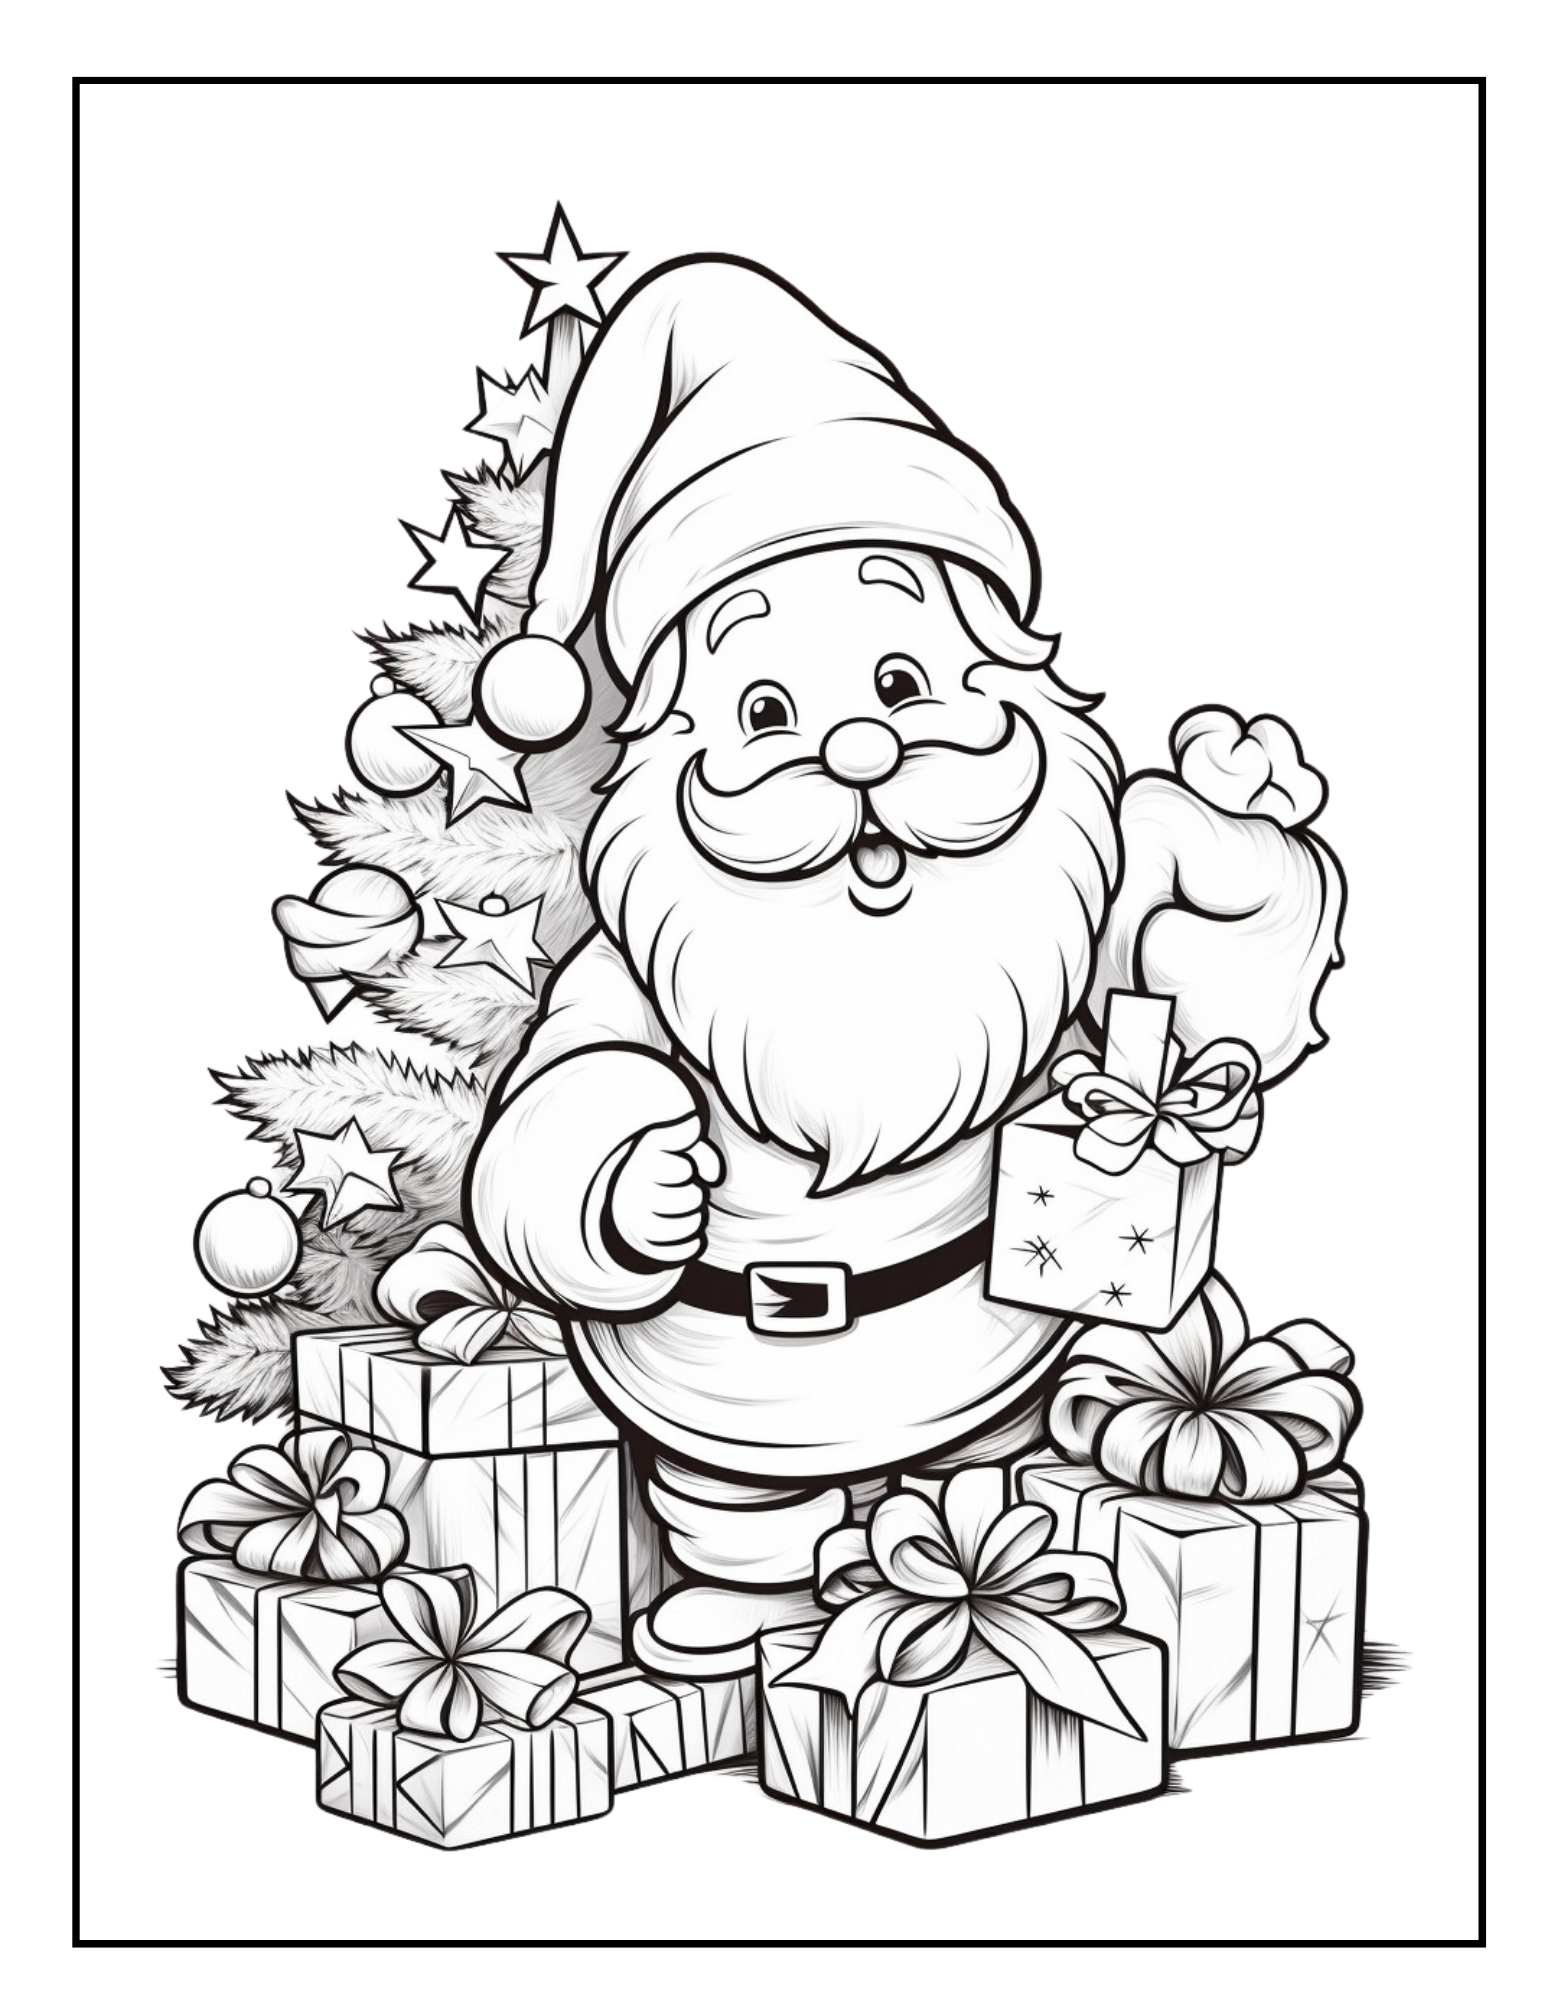 Free jolly santa and festive christmas tree coloring page â curious learners academy